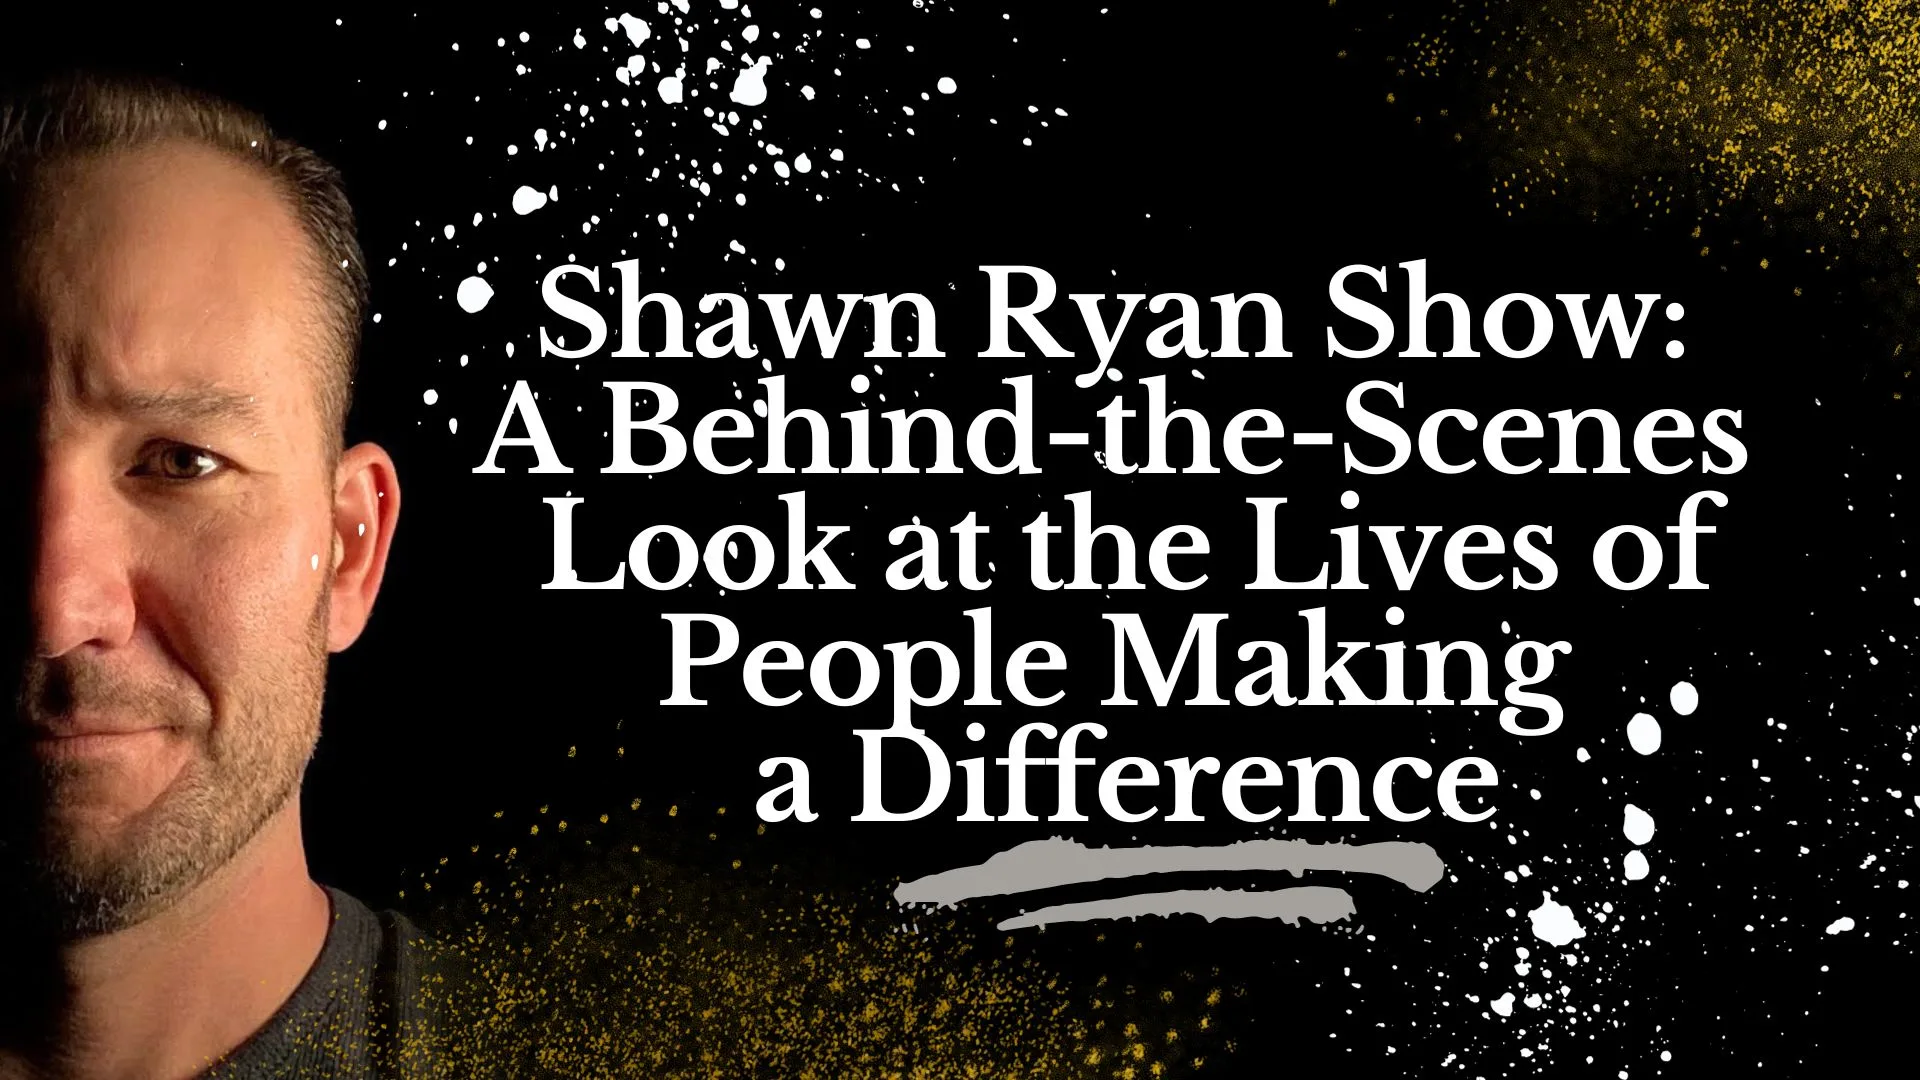 You are currently viewing Shawn Ryan Show: A Behind-the-Scenes Look at the Lives of People Making a Difference